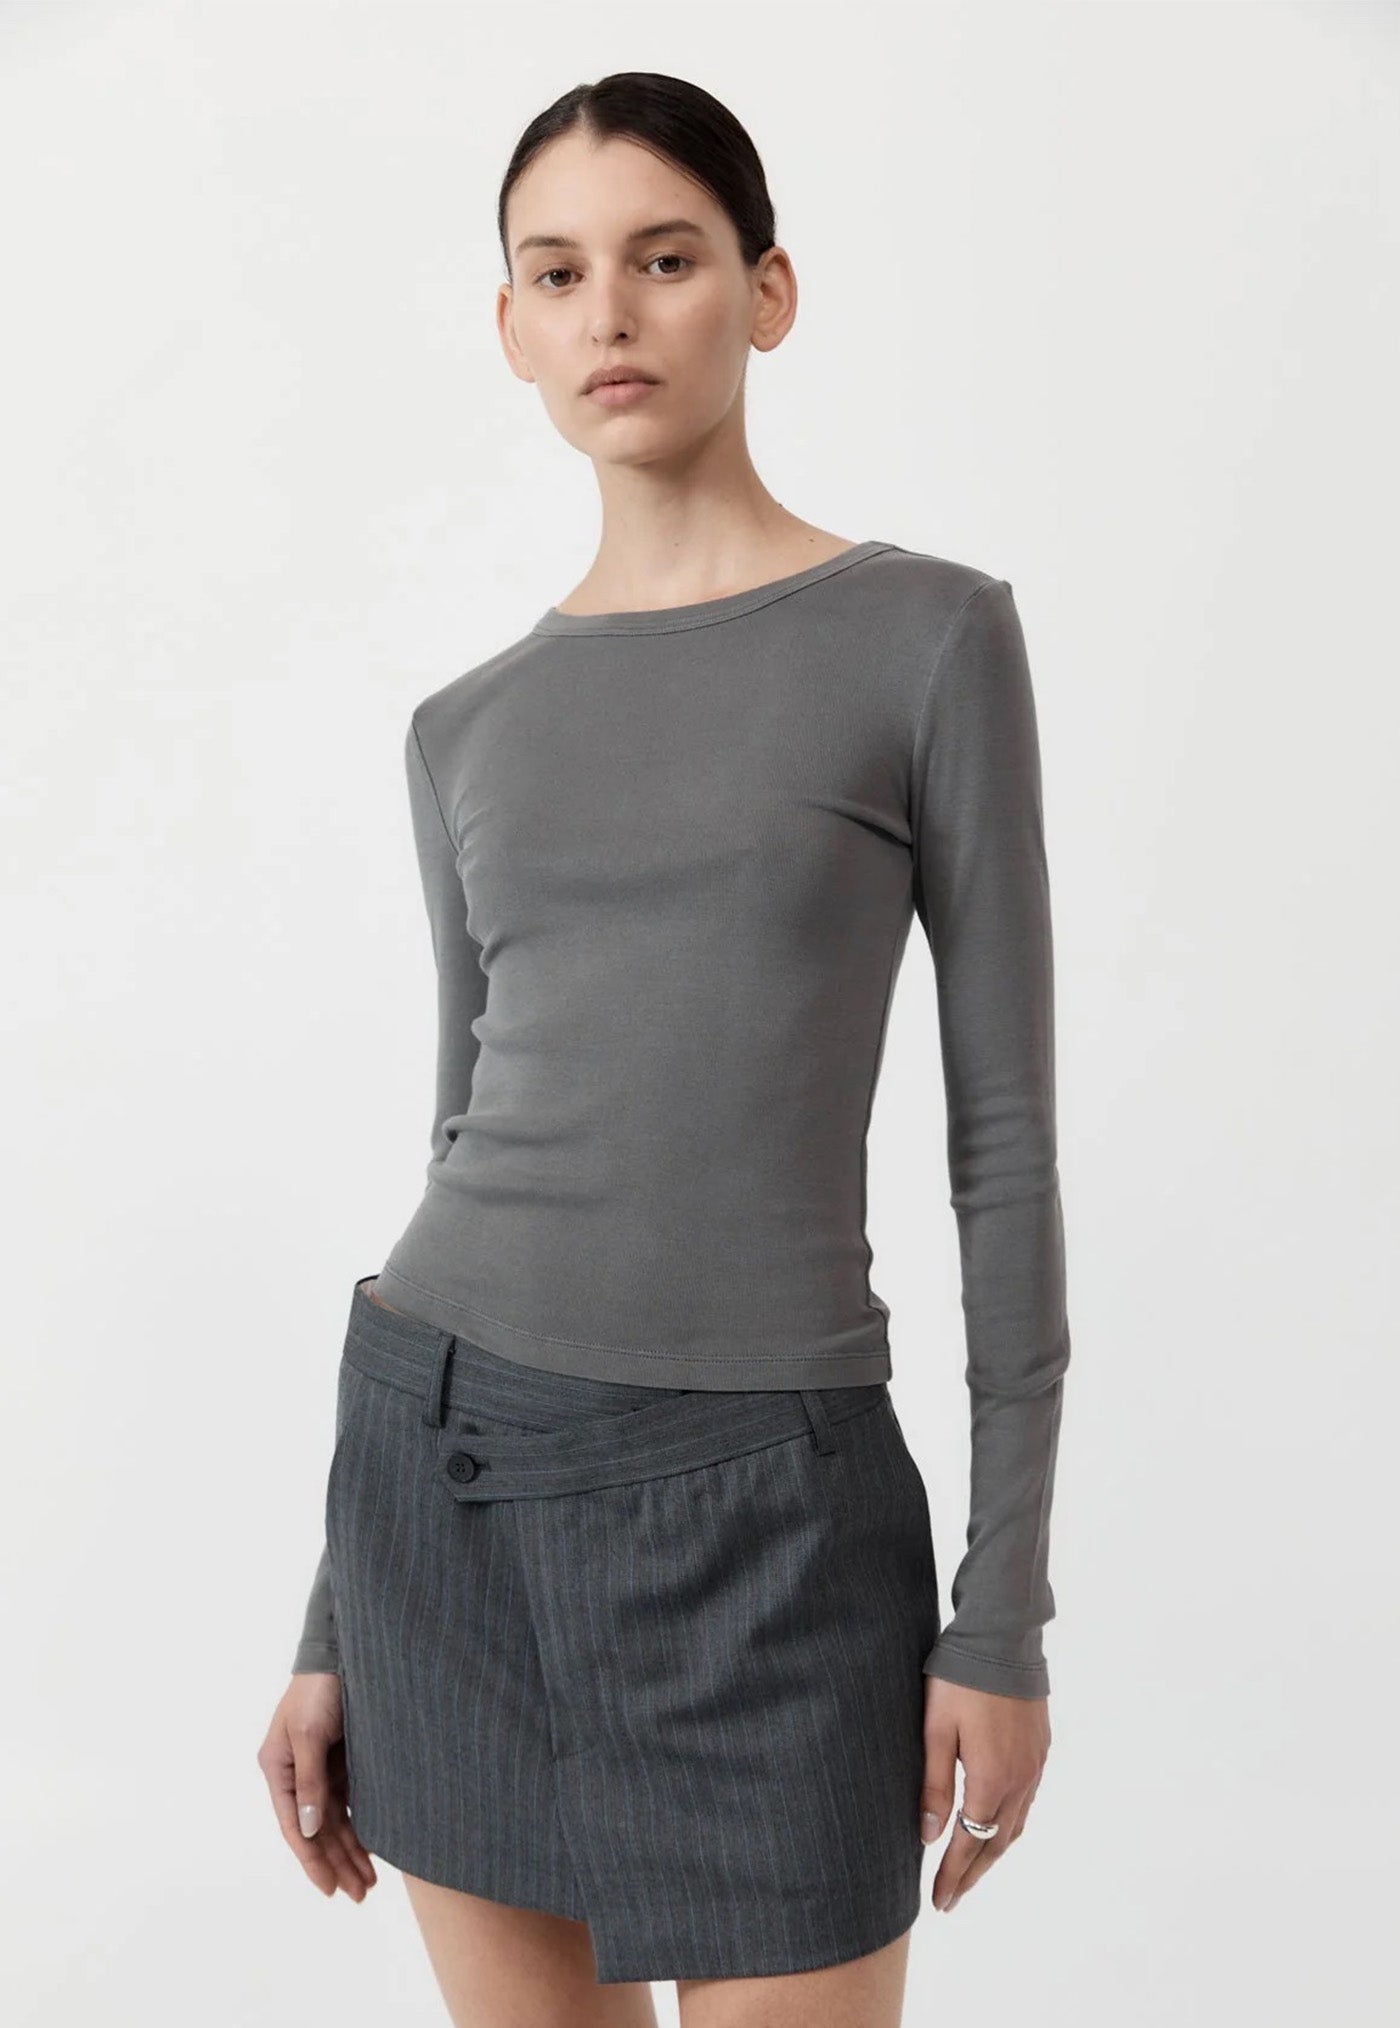 Organic Cotton Long Sleeve Top - Pewter Grey sold by Angel Divine